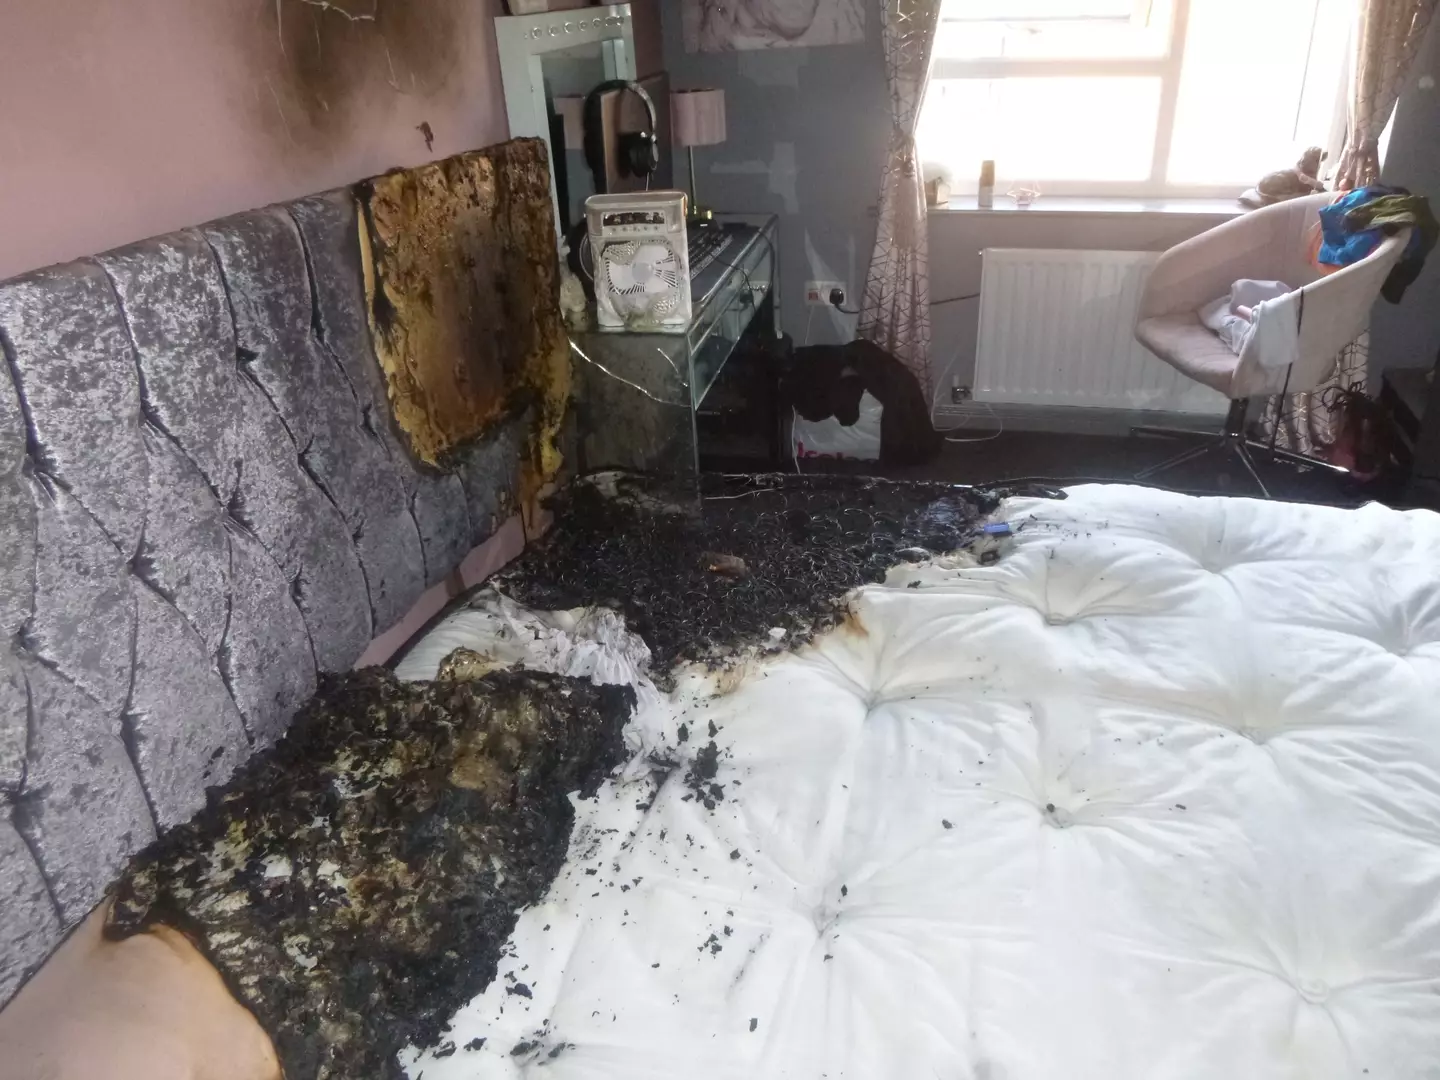 The fire was caused by a vape which exploded.